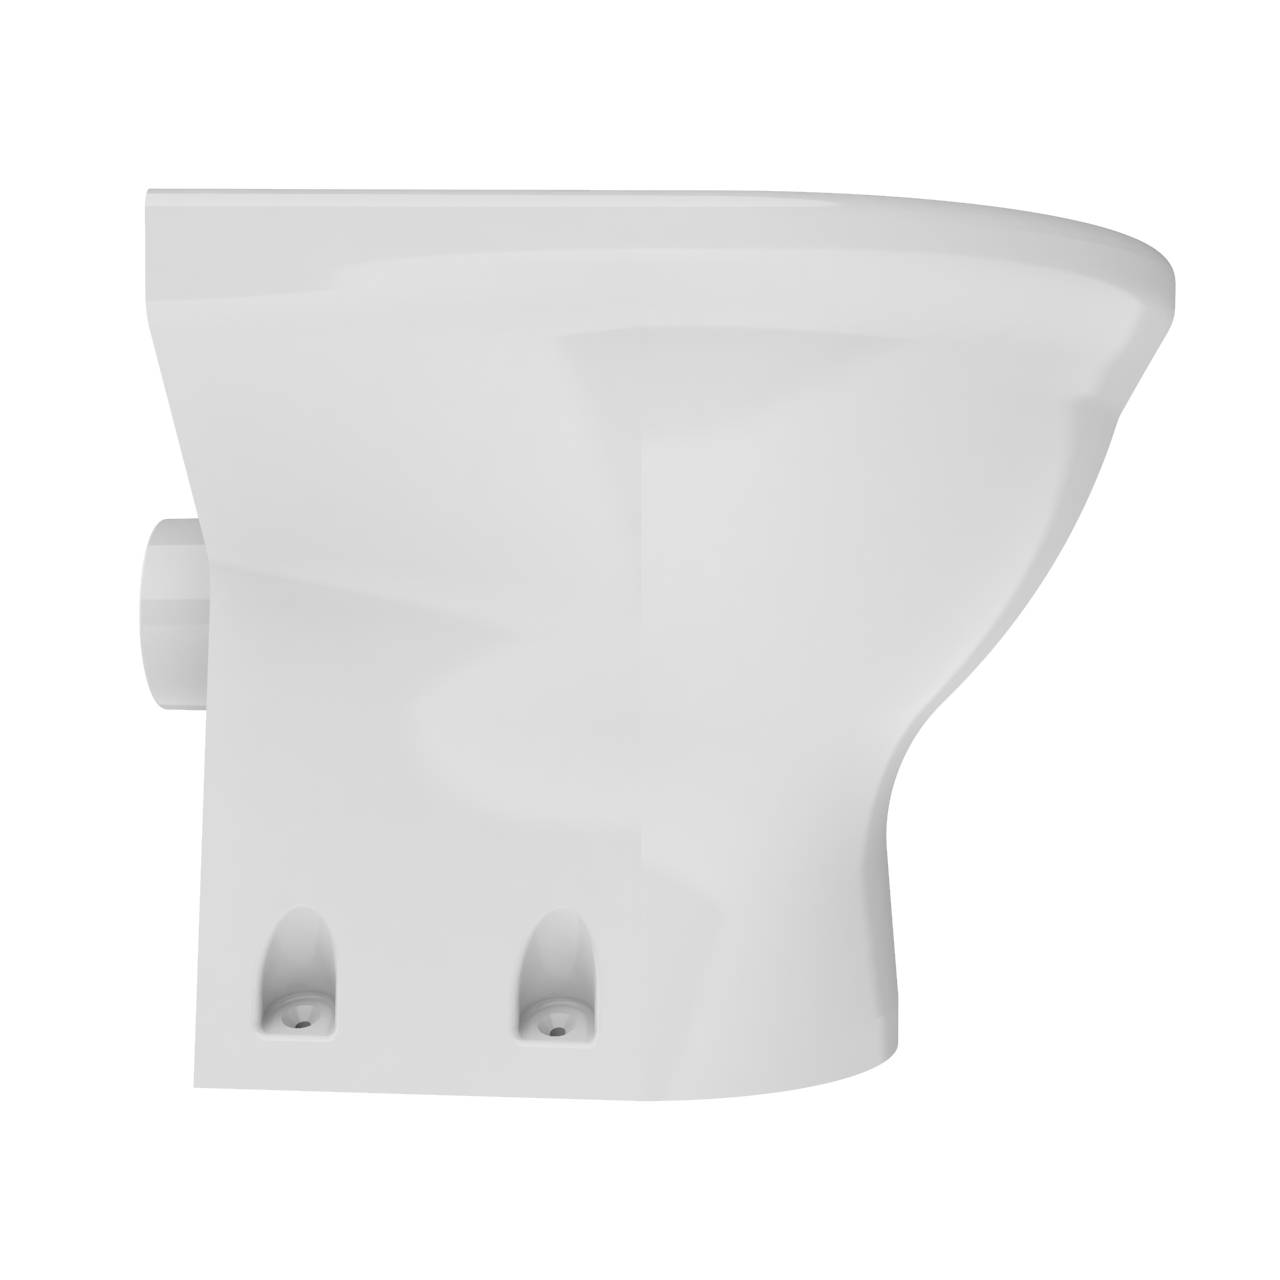 Dudley Resan Standard Height WC Pan - Floor Fixed - Grey Seat [V2] 